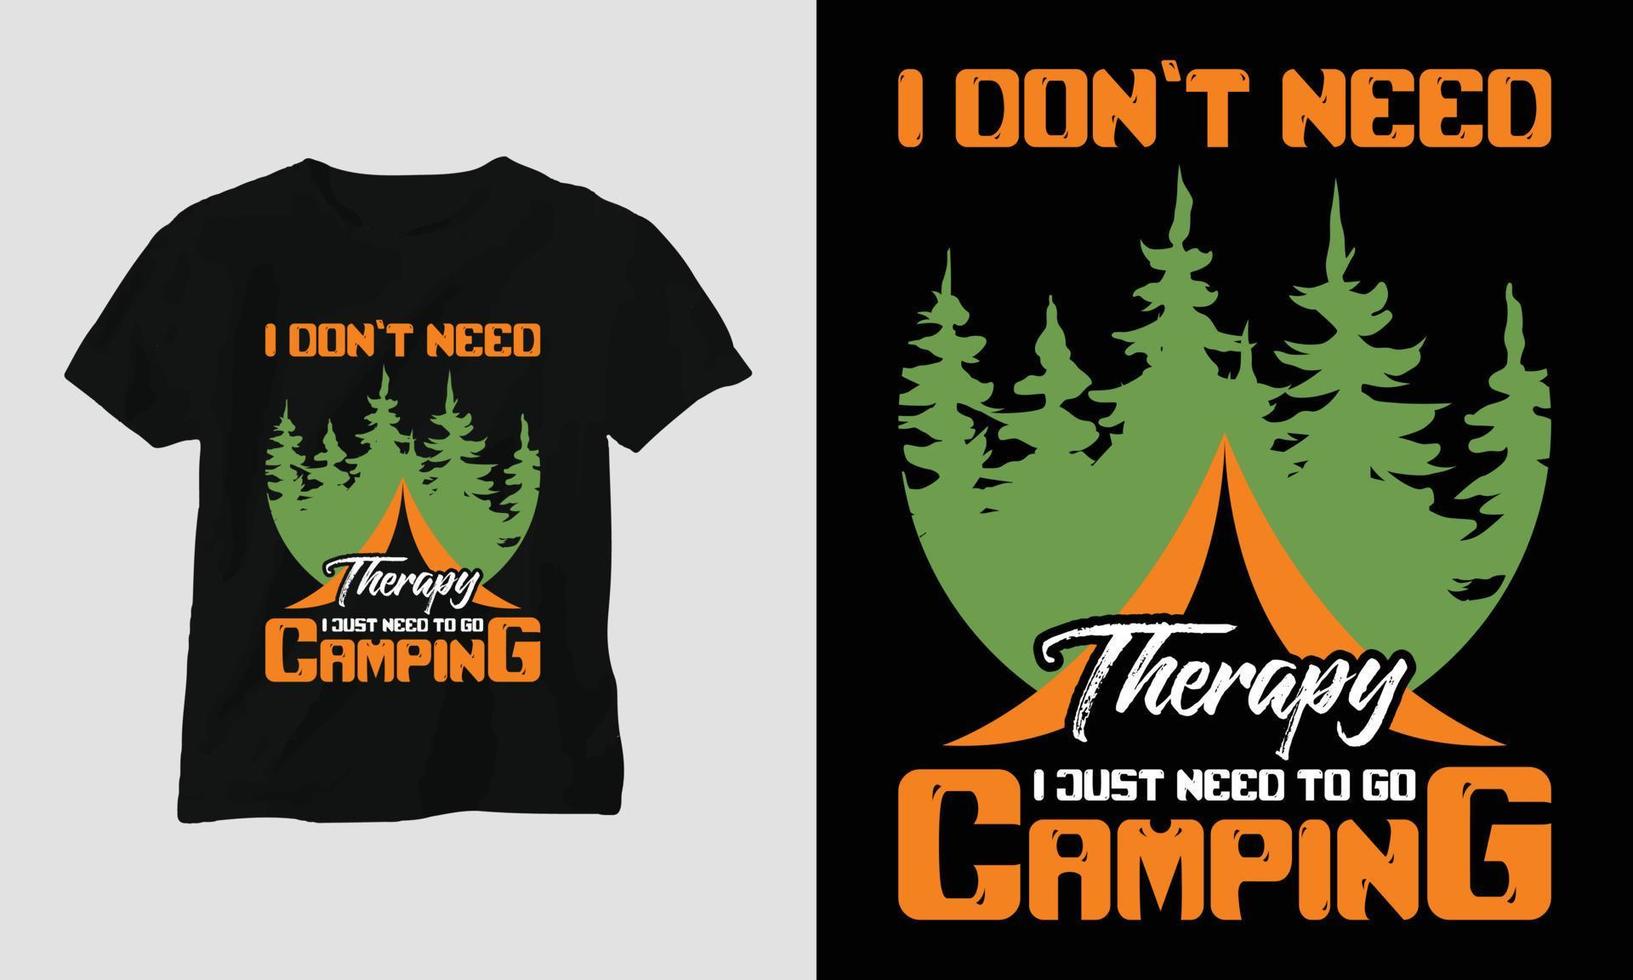 i do not need therapy i just need to go camping - Camping T-shirt design vector